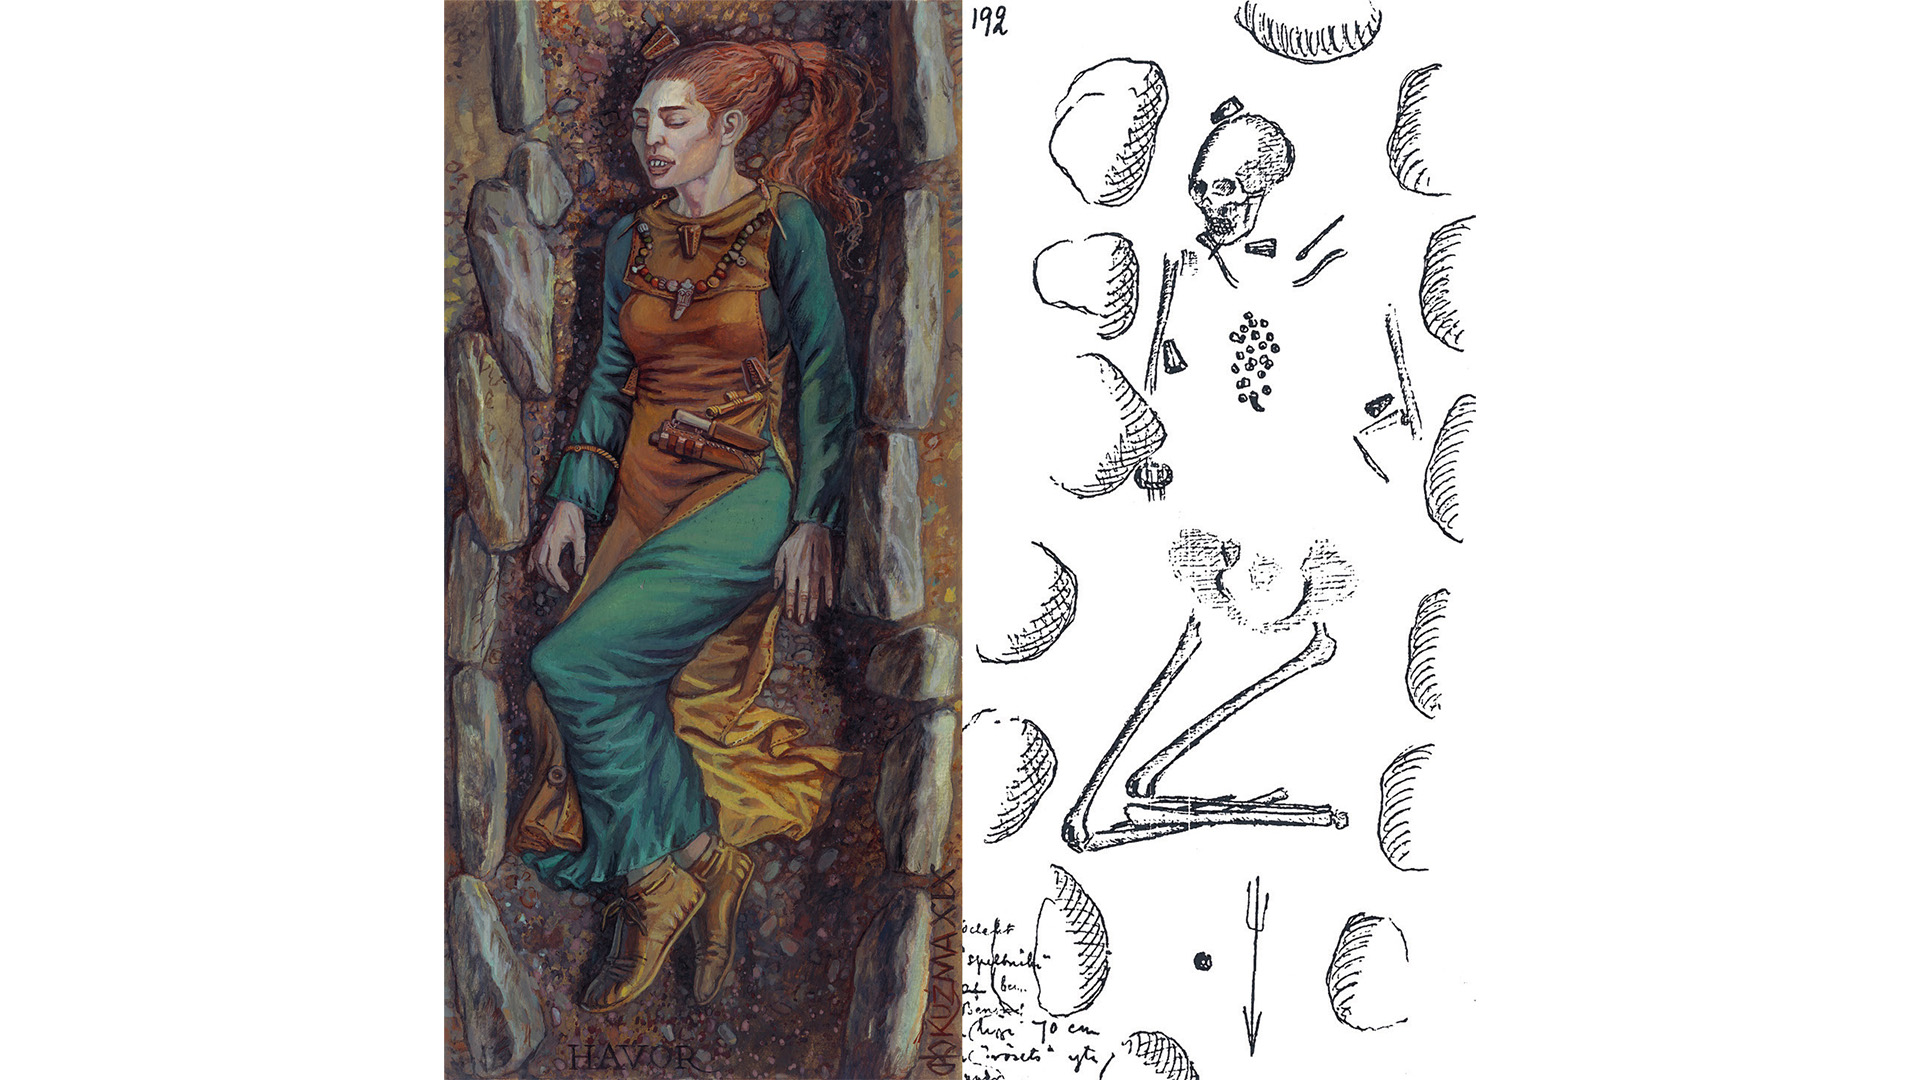 (Left): A drawing of a reconstruction of grave 192 on Gotland, which contained the remains of a woman with an artificially modified skull. (Right): A 19th century drawing of the grave.